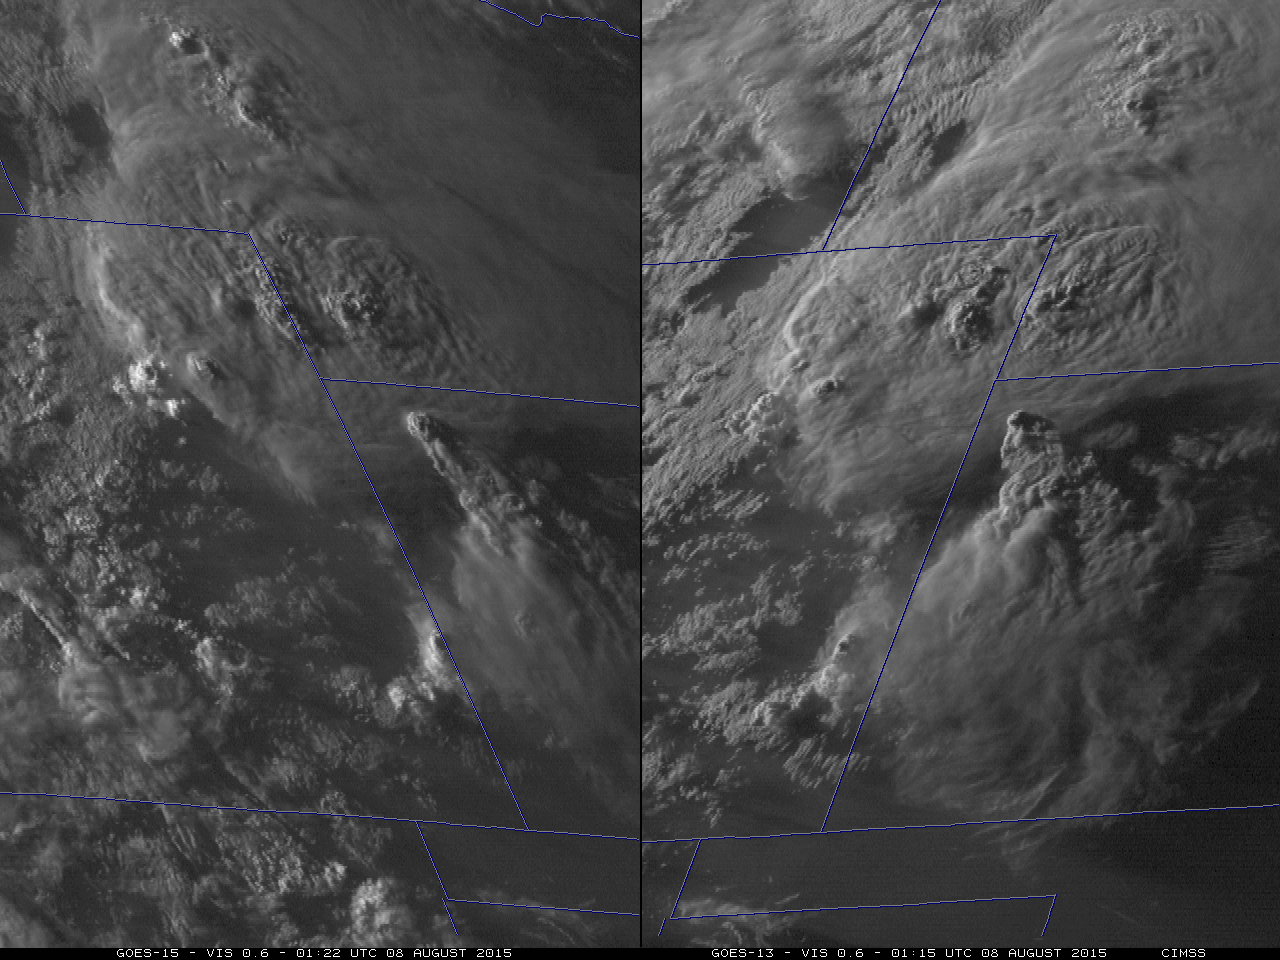 GOES-15 (left) and GOES-13 (right) 0.63 µm Visible images [click to play animation]